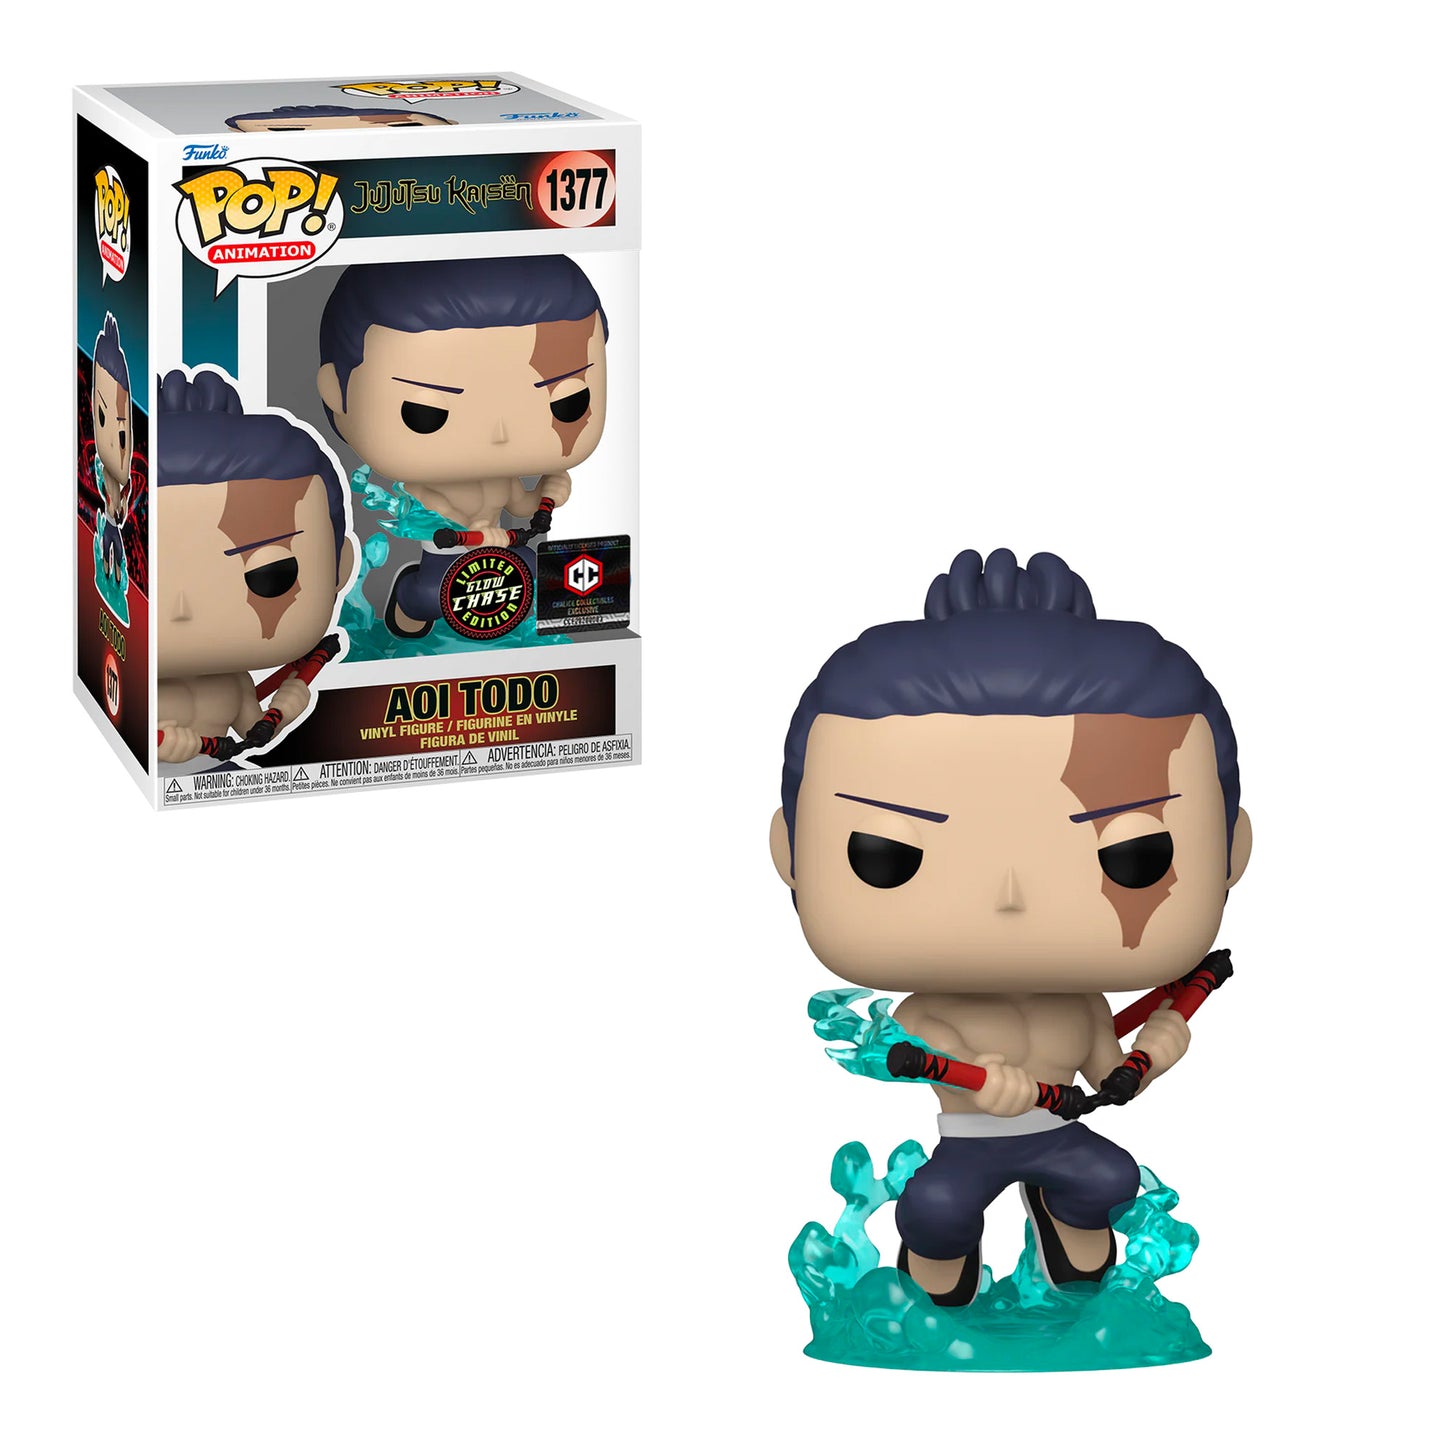 Funko Pop! Animation: Jujutsu Kaisen - Aoi Todo #1377 Chalice Collectibles Exclusive (1 in 6 chance of Chase)